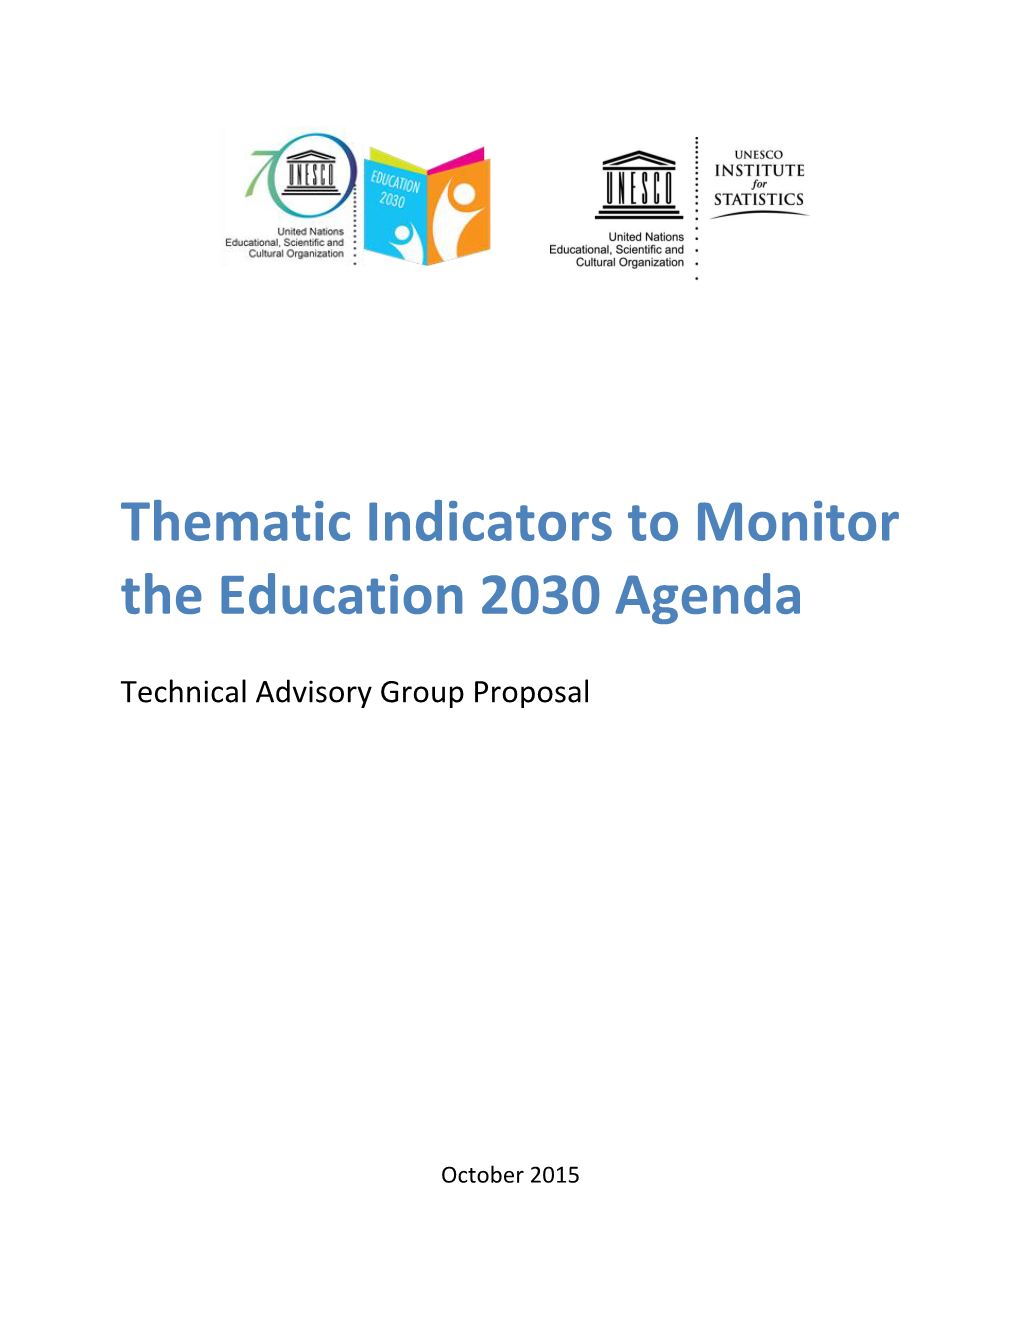 Thematic Indicators to Monitor the Education 2030 Agenda